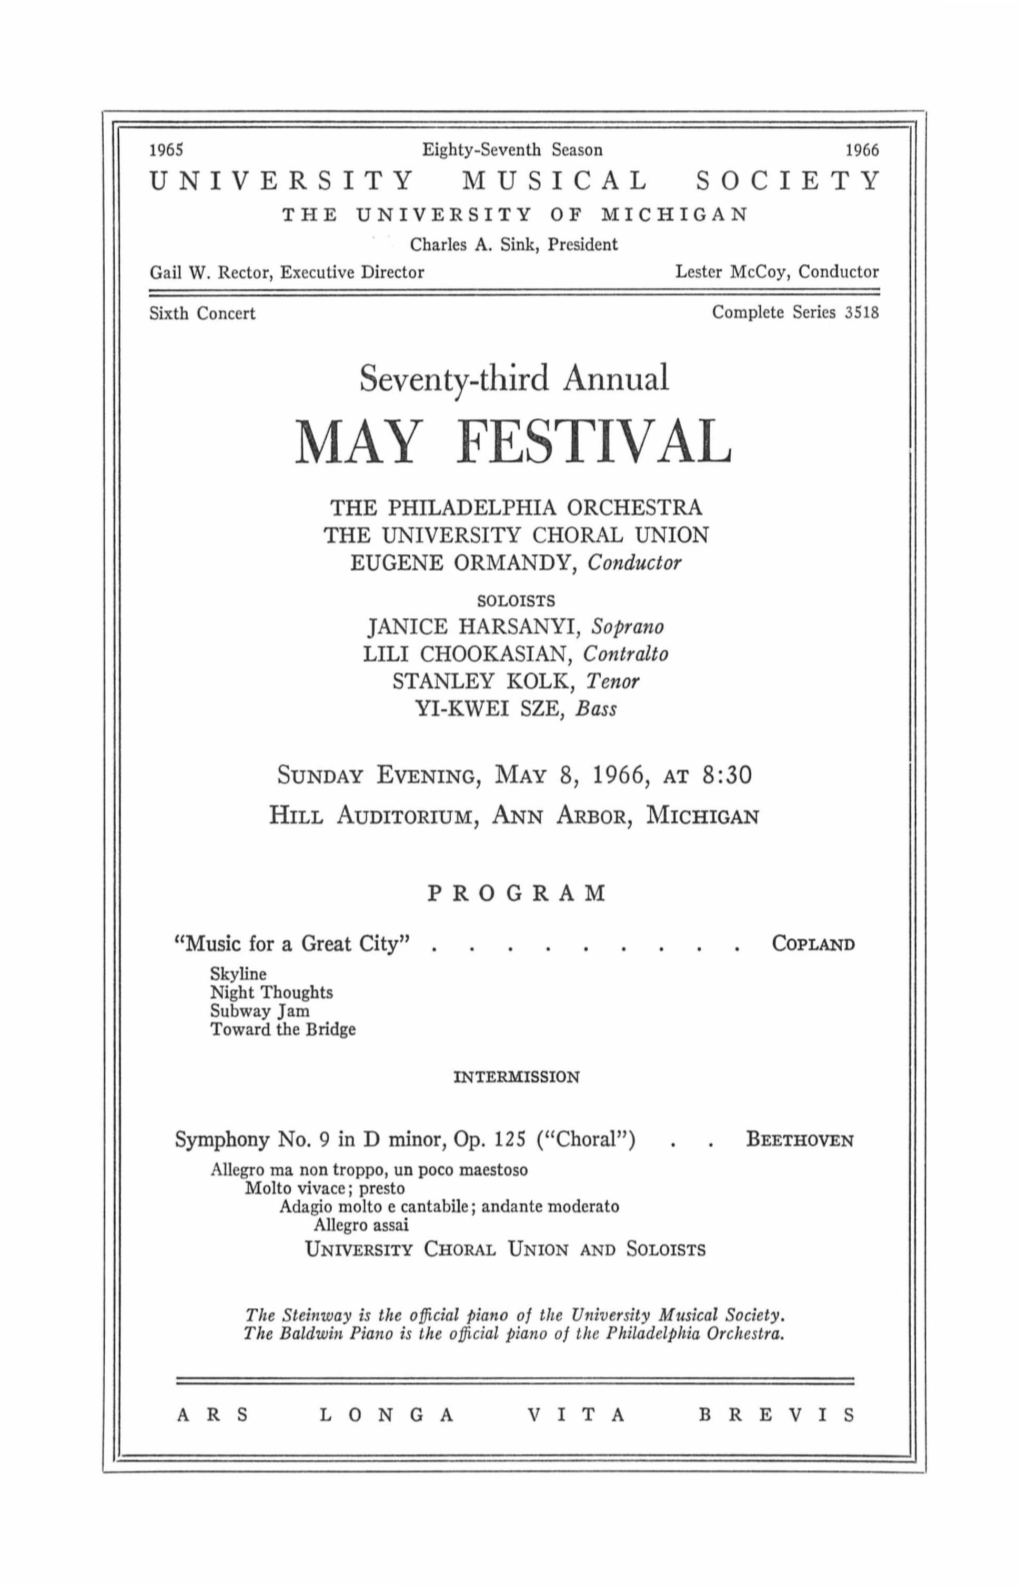 MAY FESTIVAL the PHILADELPHIA ORCHESTRA the UNIVERSITY CHORAL UNION EUGENE ORMANDY, Conductor